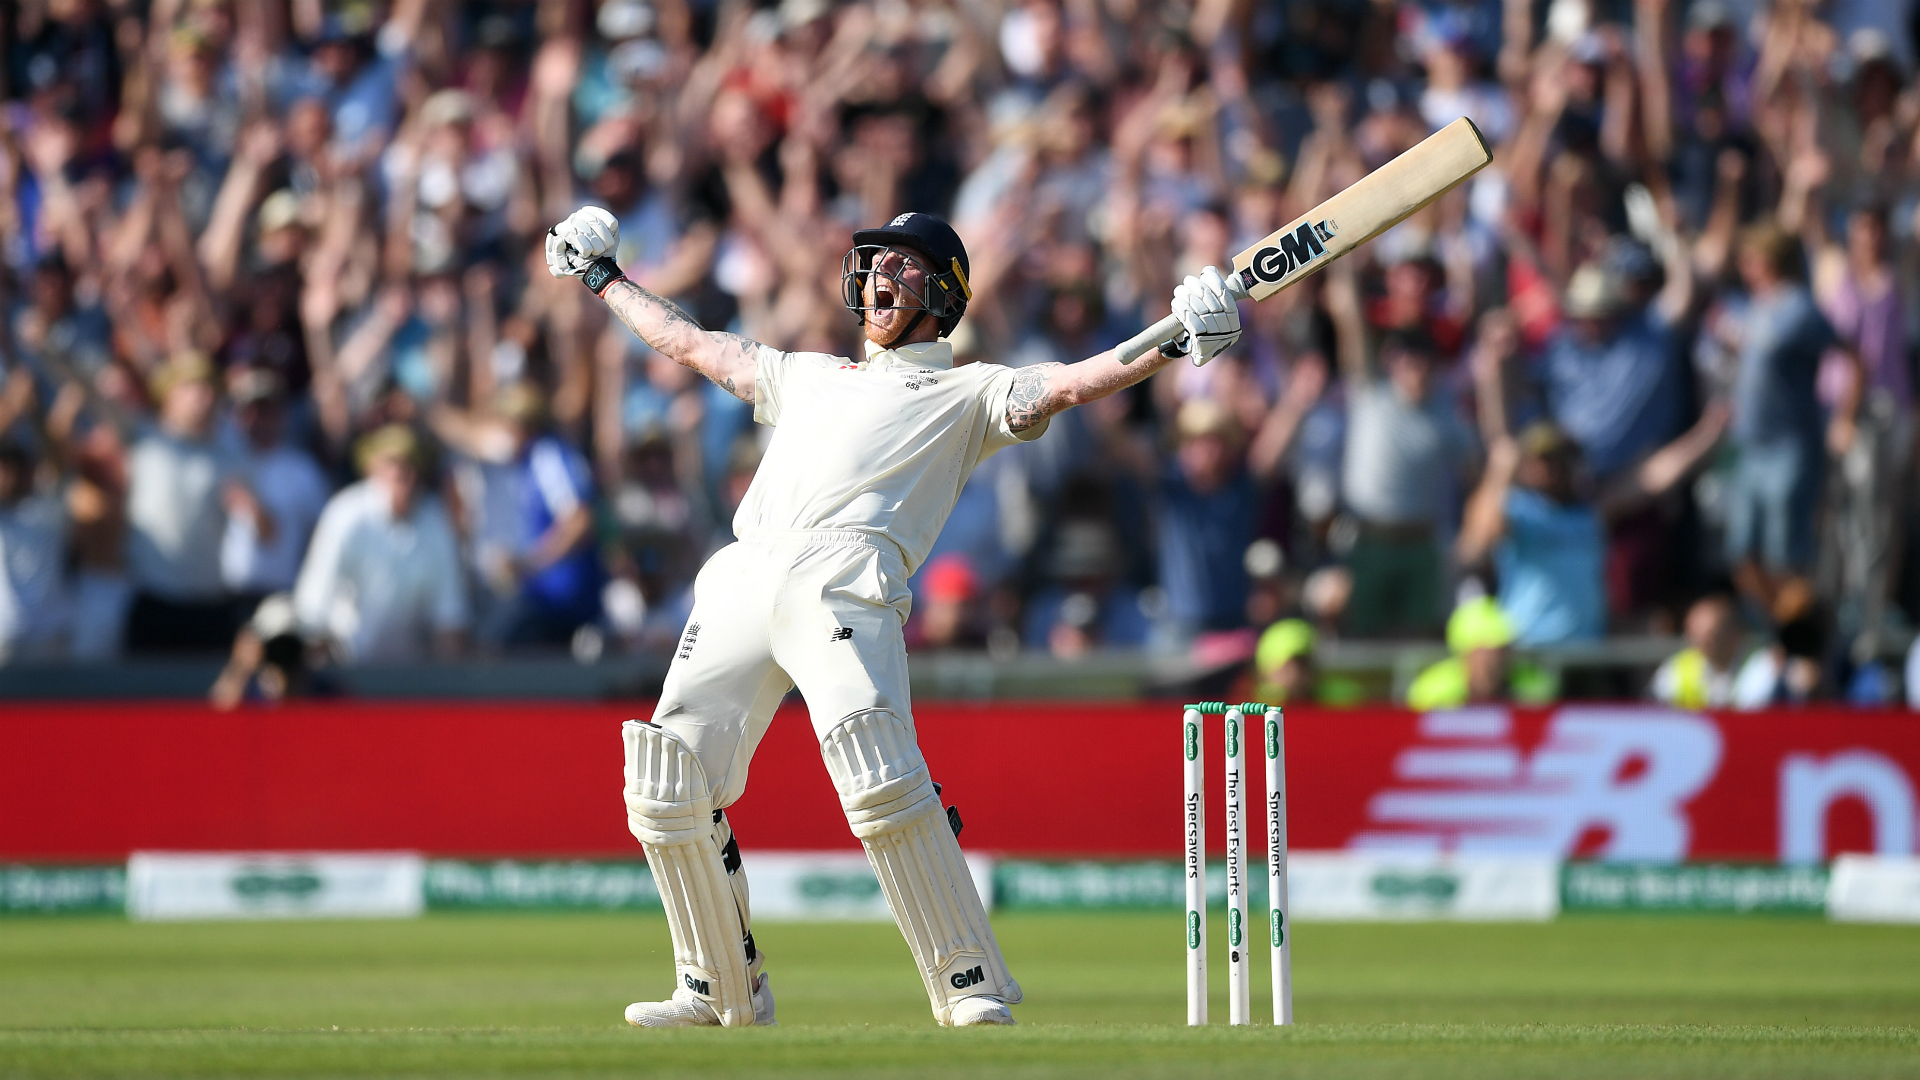 Virat Kohli's three-year reign as Wisden's leading cricketer is over, with Ben Stokes becoming the first English winner since 2005.